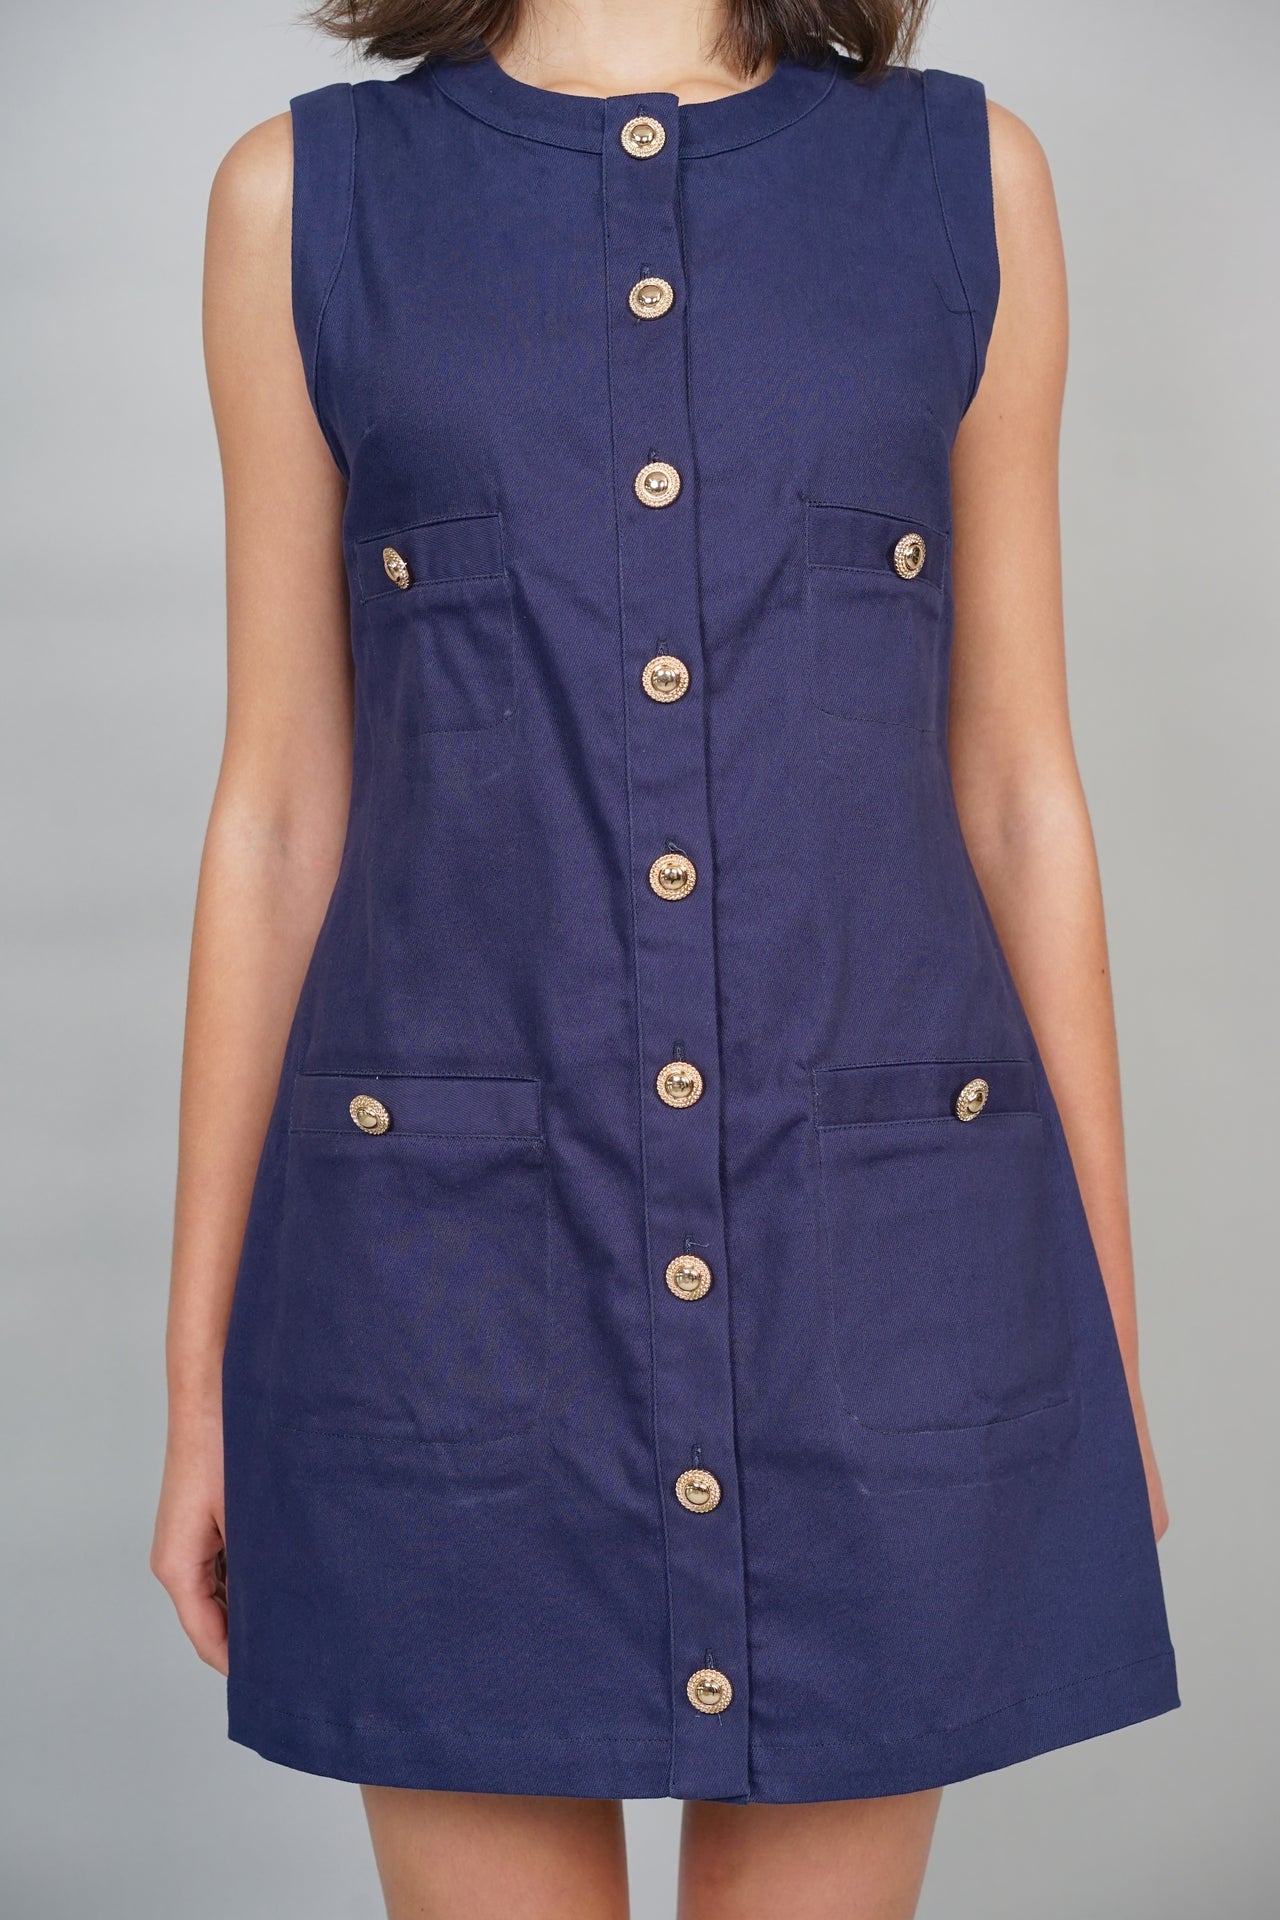 Buttoned Utility Denim Shift Dress in Navy - Arriving Soon